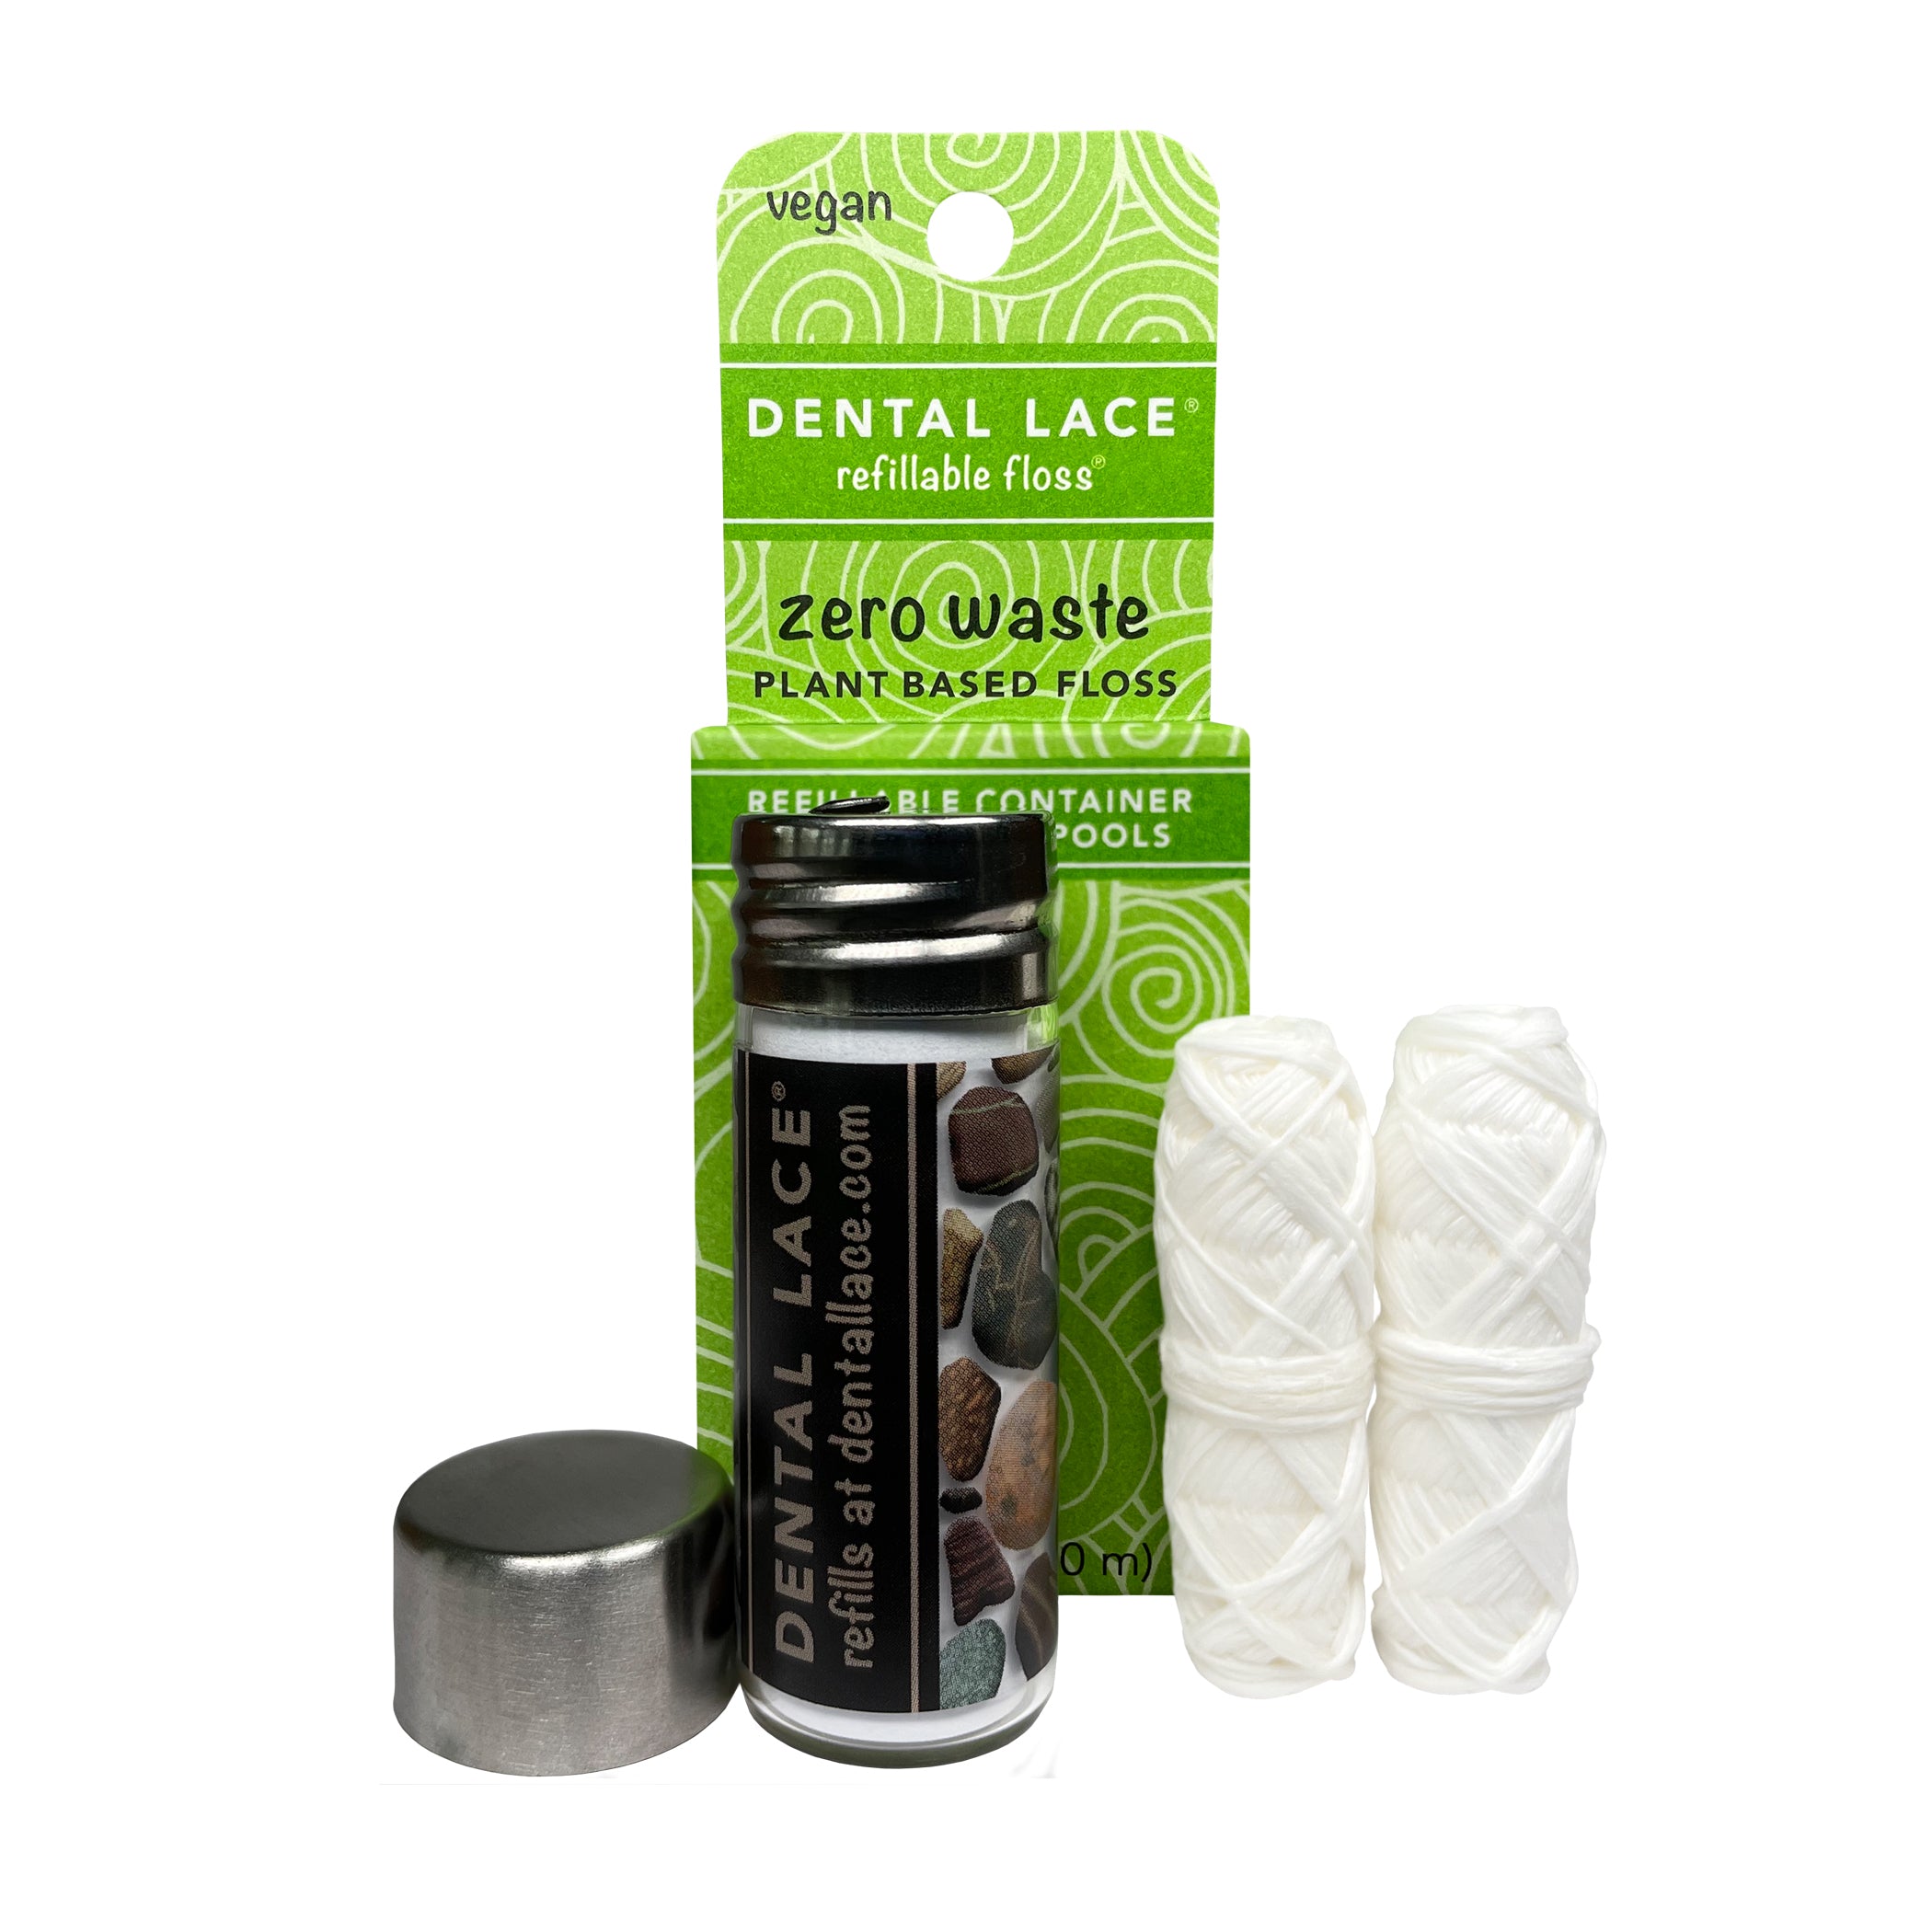 Dental Lace Refillable Zero Waste Plant Based Vegan Floss Container with Refill